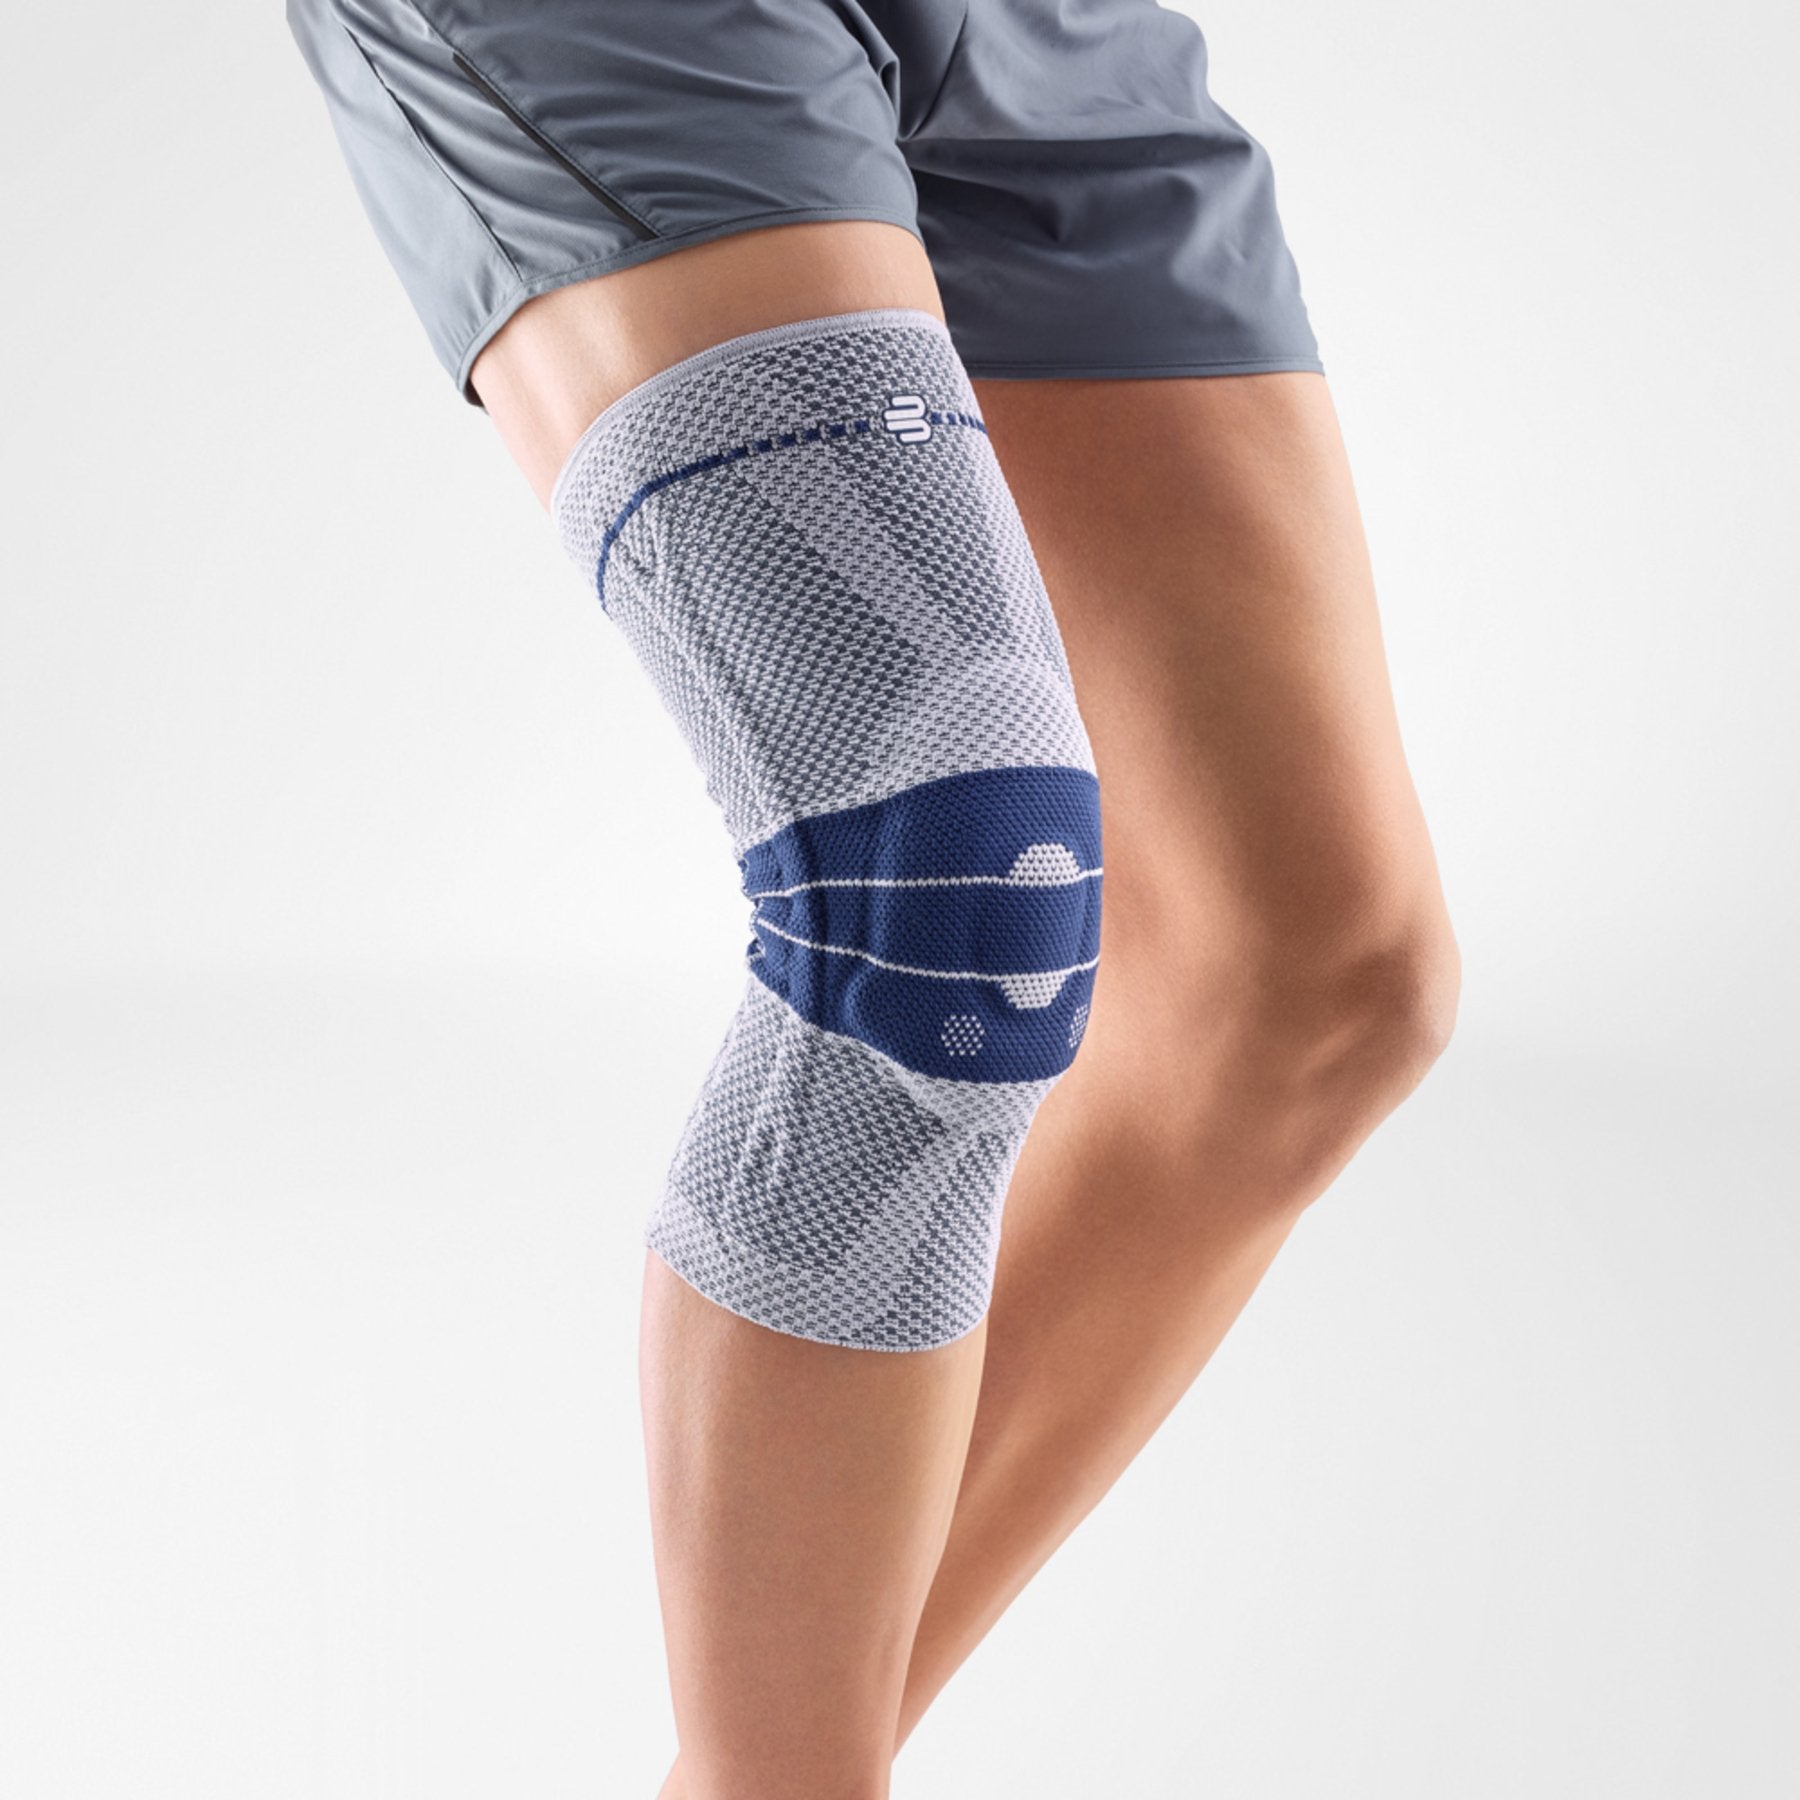 Knee Injury Braces & Supports